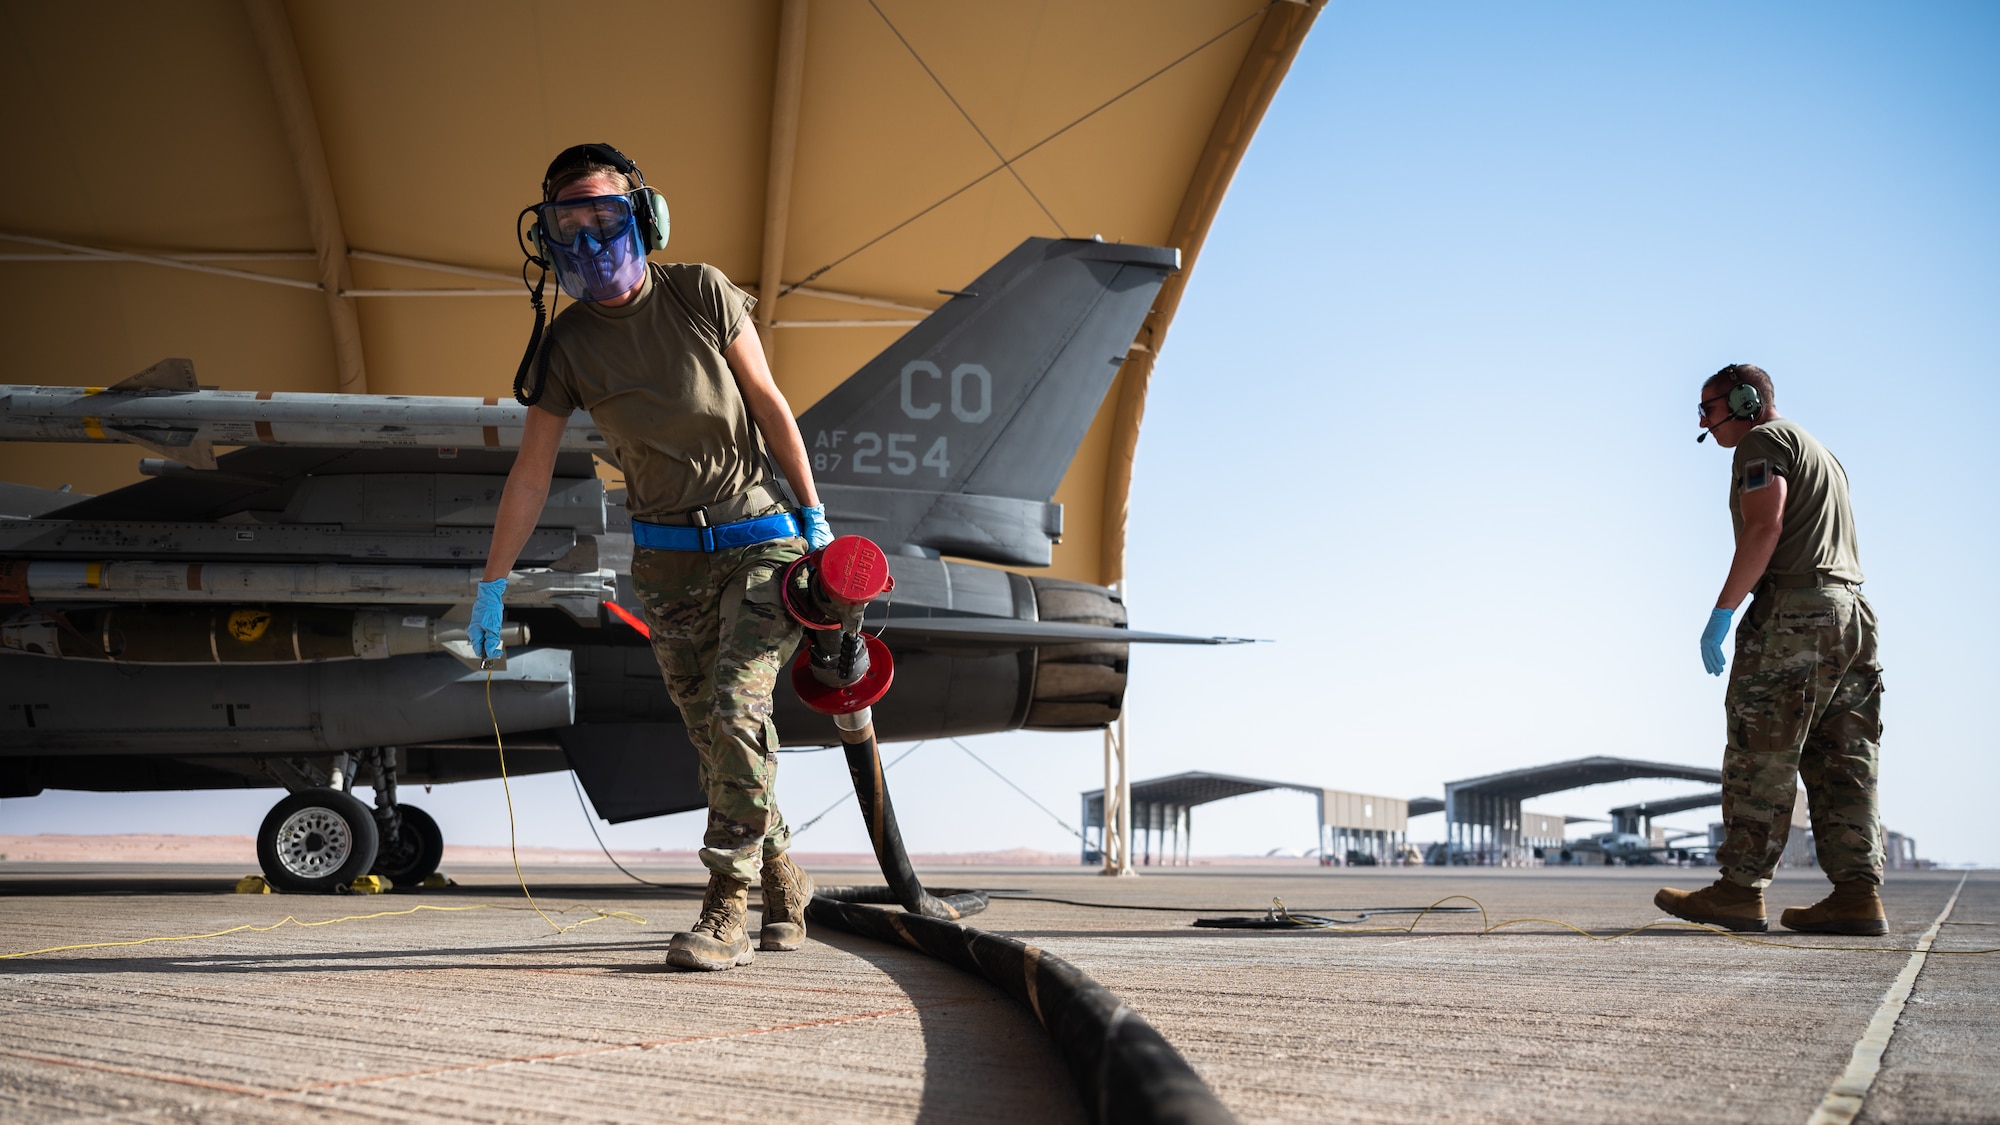 U.S. Air Force Staff Sgt. Nicole Beck, 379th Air Expeditionary Maintenance Squadron crew chief, carries a fuel hose after hot-pit refueling an F-16 Fighting Falcon at Prince Sultan Air Base, Kingdom of Saudi Arabia, Nov. 27, 2021. A hot-pit consists of rapid-refueling an aircraft while it is still running, allowing aircrew to spend less time on the ground. (U.S. Air Force photo by Senior Airman Jacob B. Wrightsman)